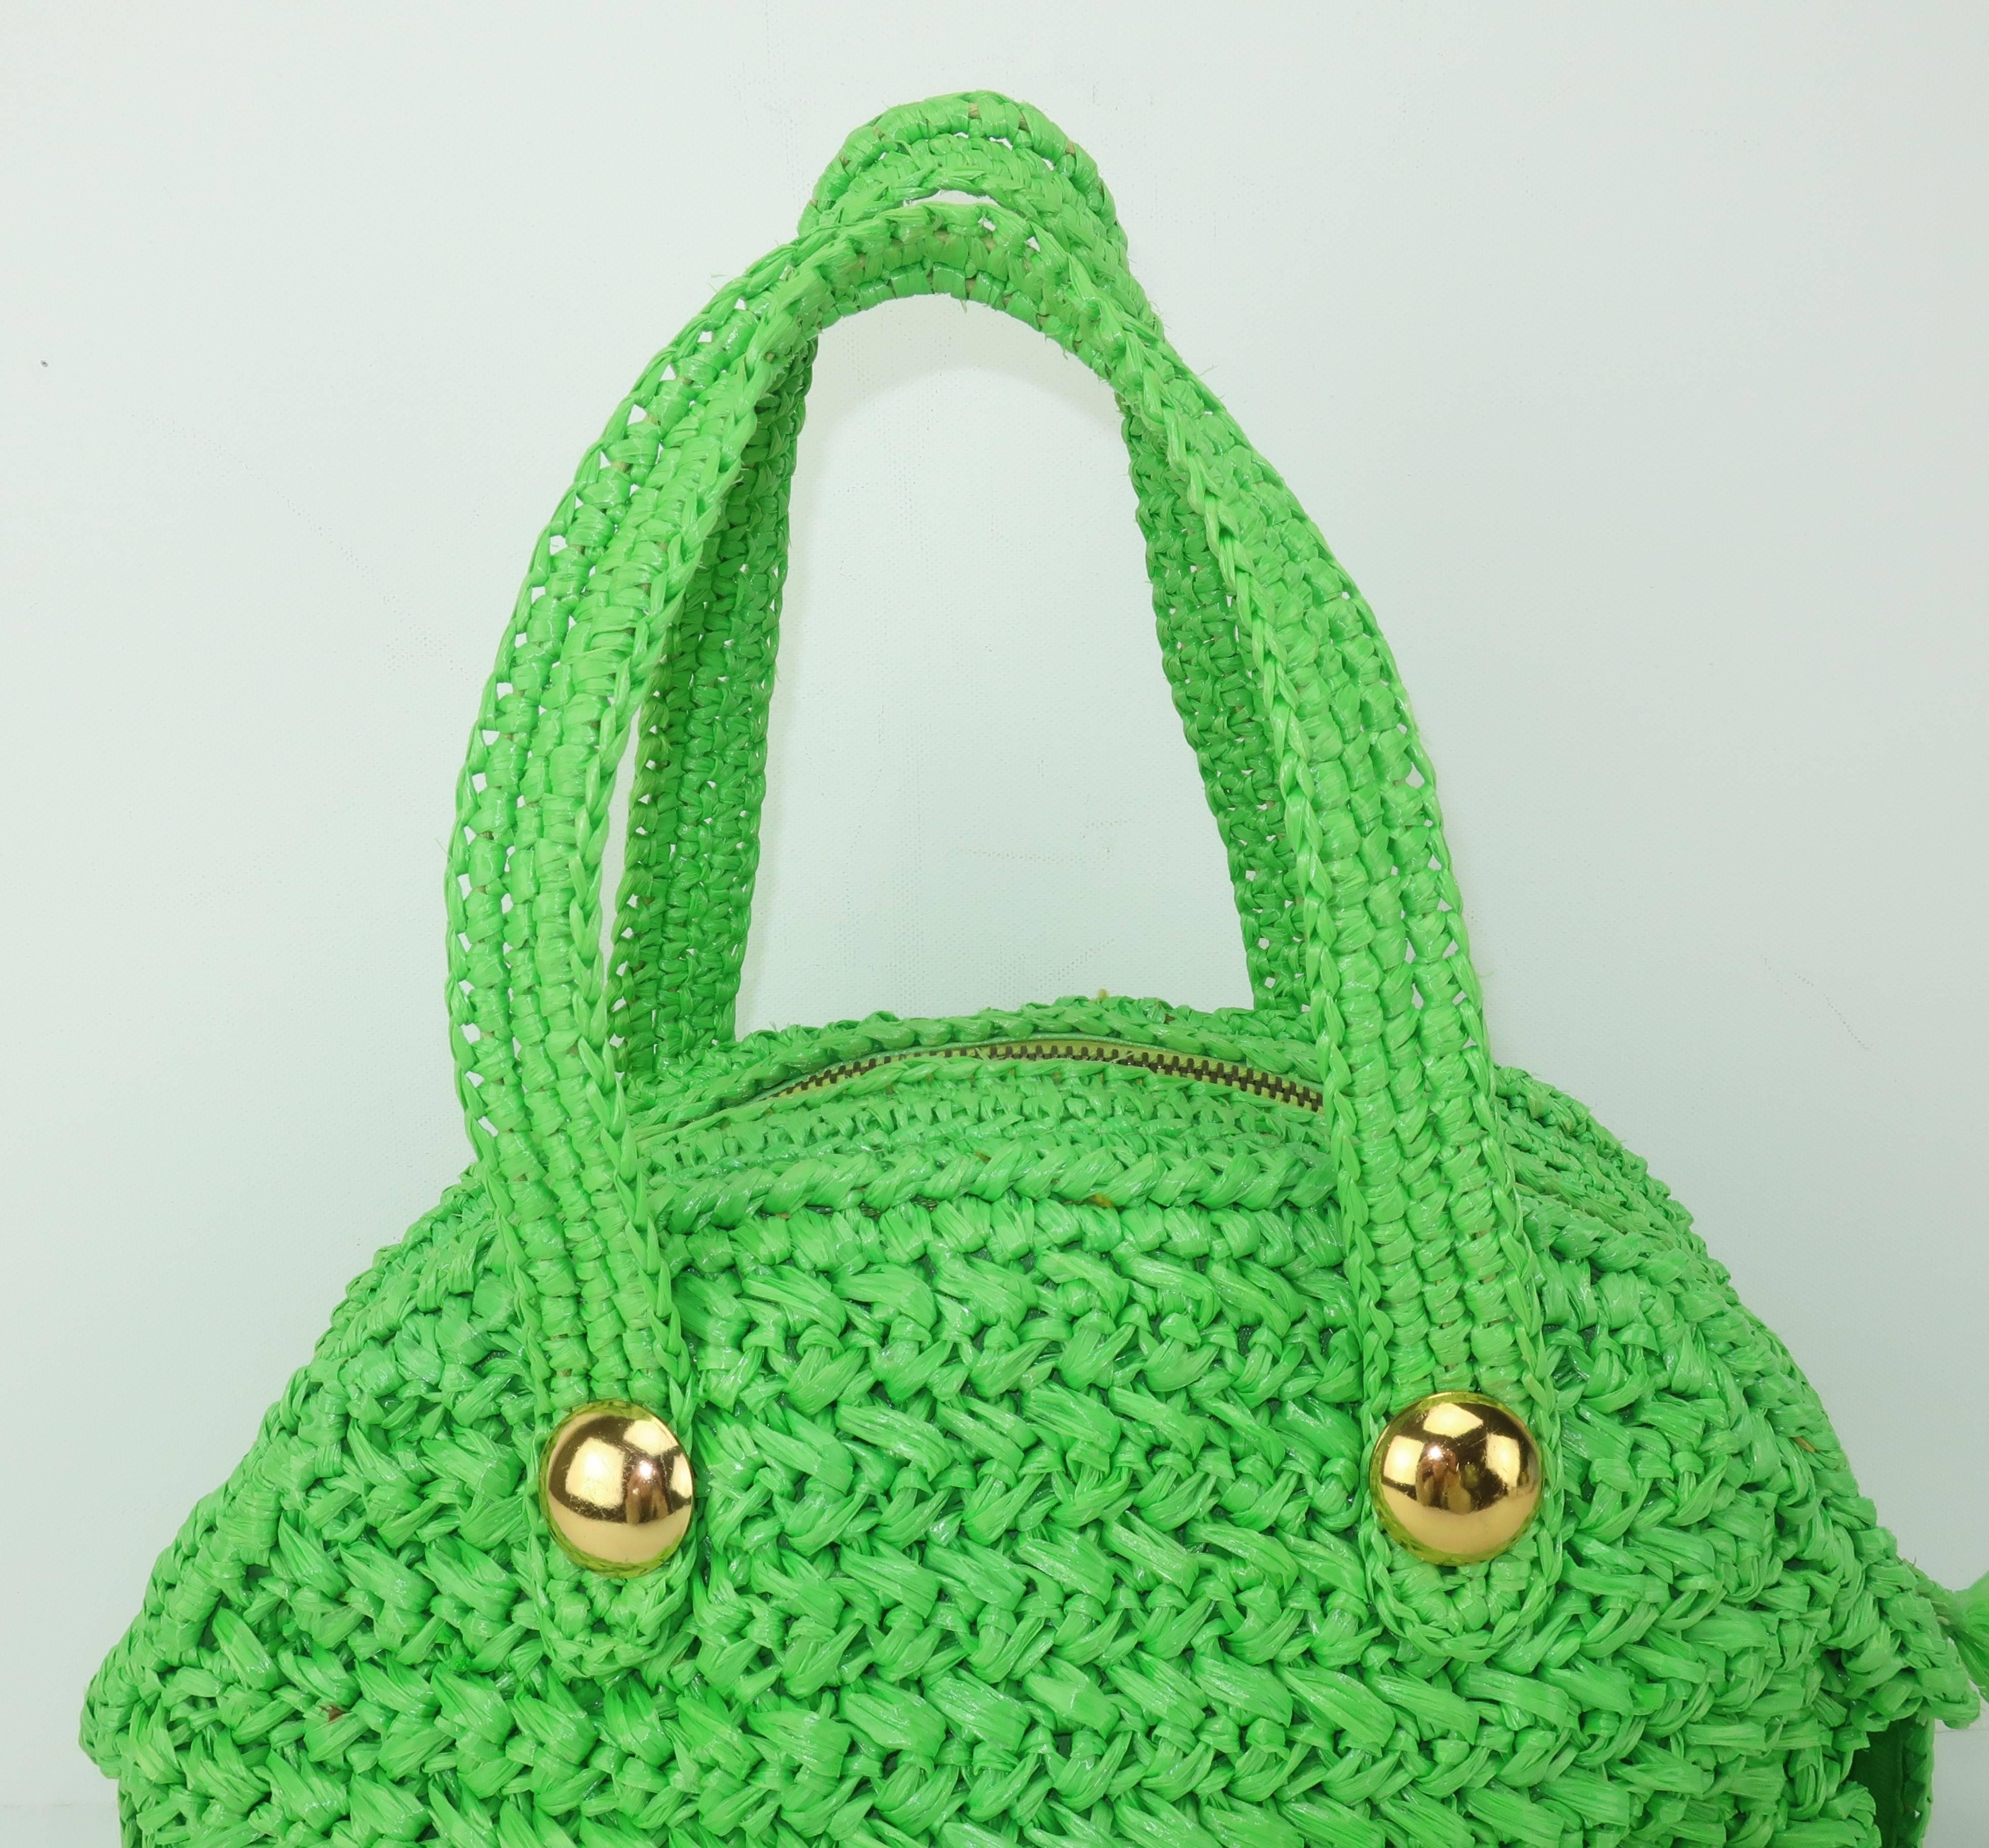 We will playfully call this one the 'Kermit' bag and claim that it is easy to be green!  This whimsical kelly green satchel handbag is just for fun and perfect for a summertime color punch.  Designed under the Marchioness label for famed department